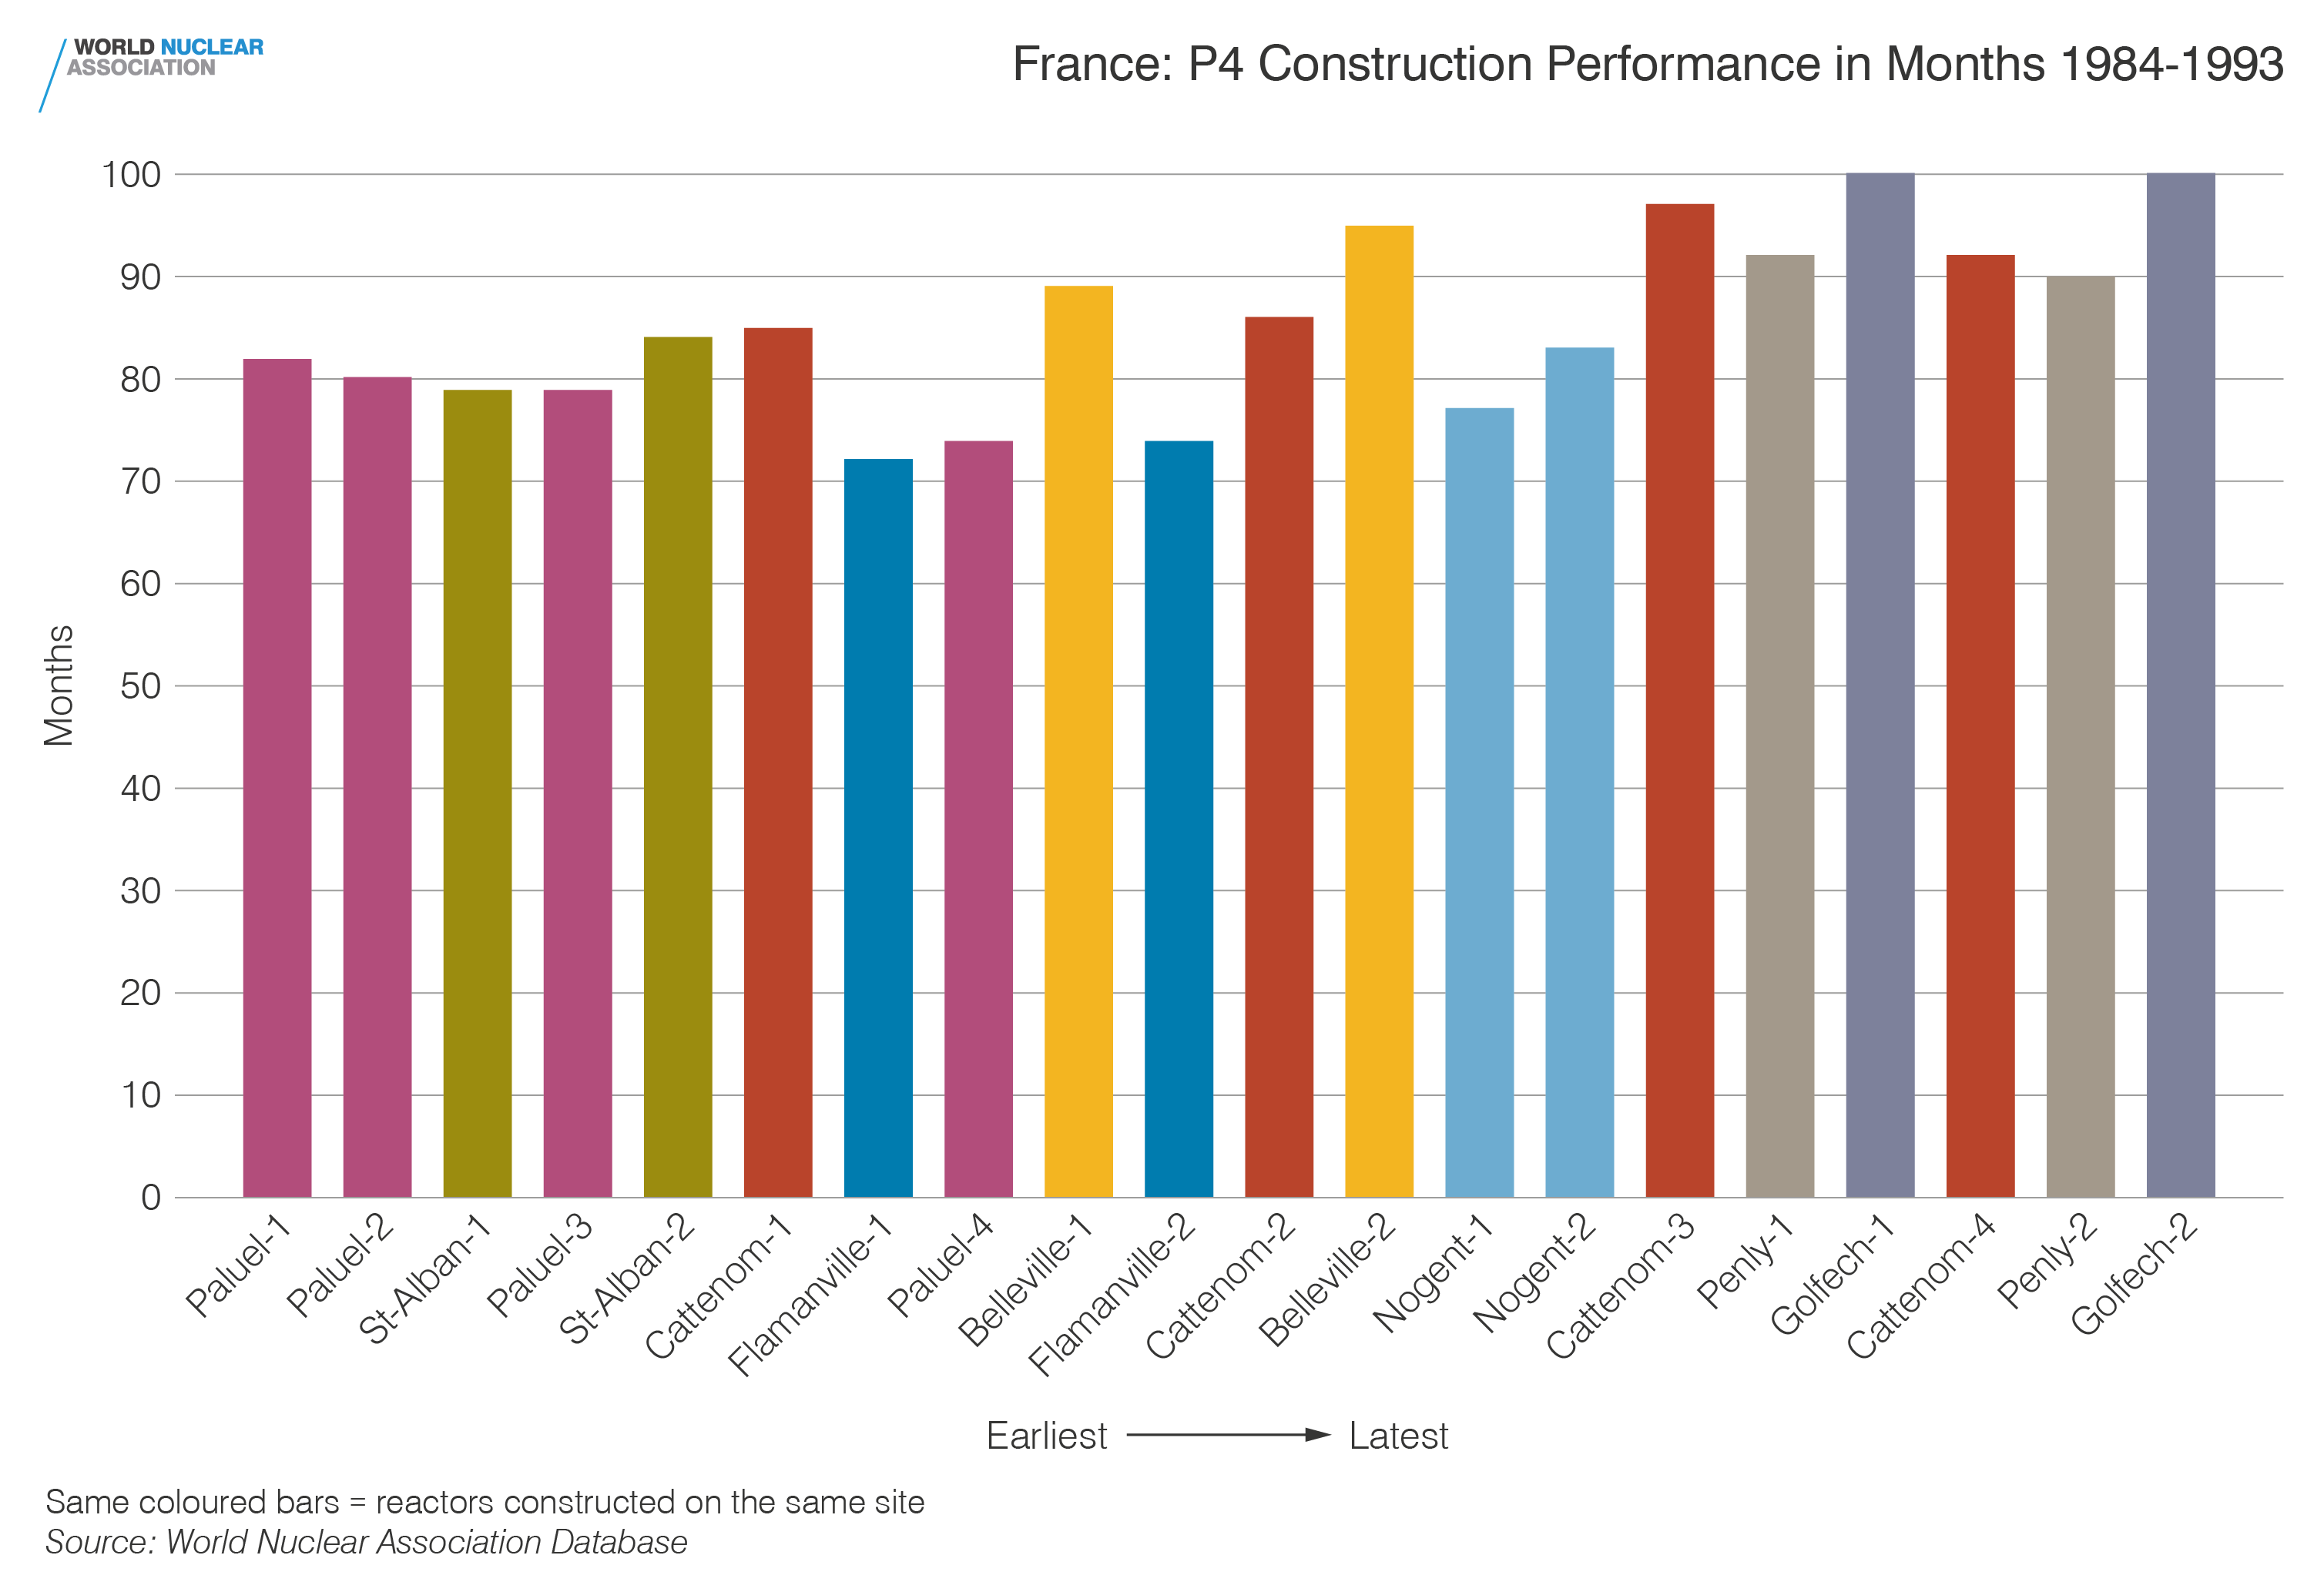 France: P4 construction performance in months 1984-1993